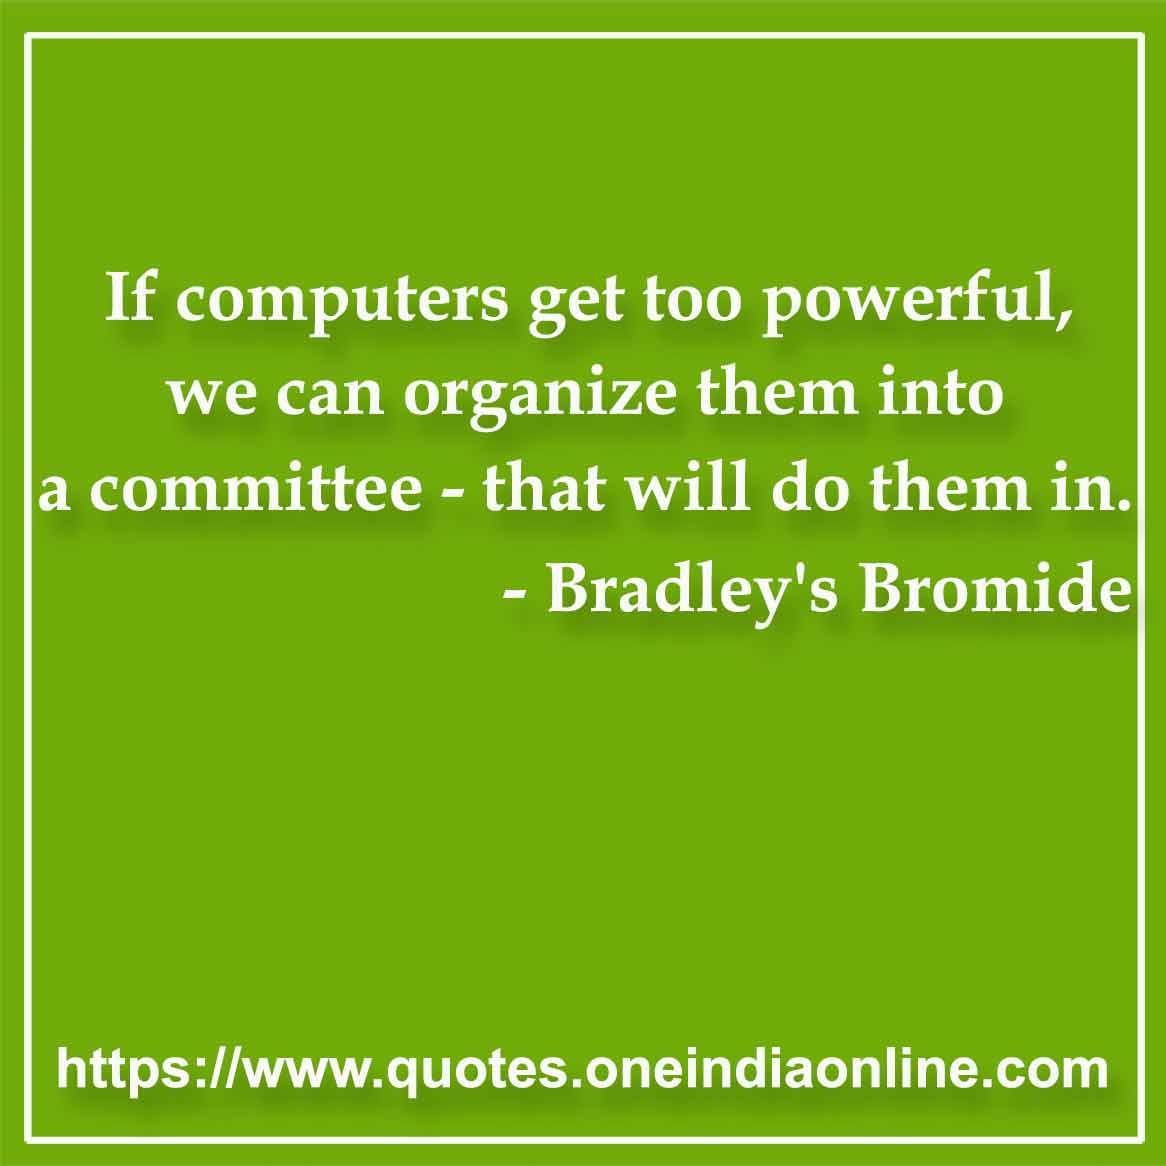 If computers get too powerful, we can organize them into a committee - that will do them in.

- Computer Quotes by Bradley's Bromide